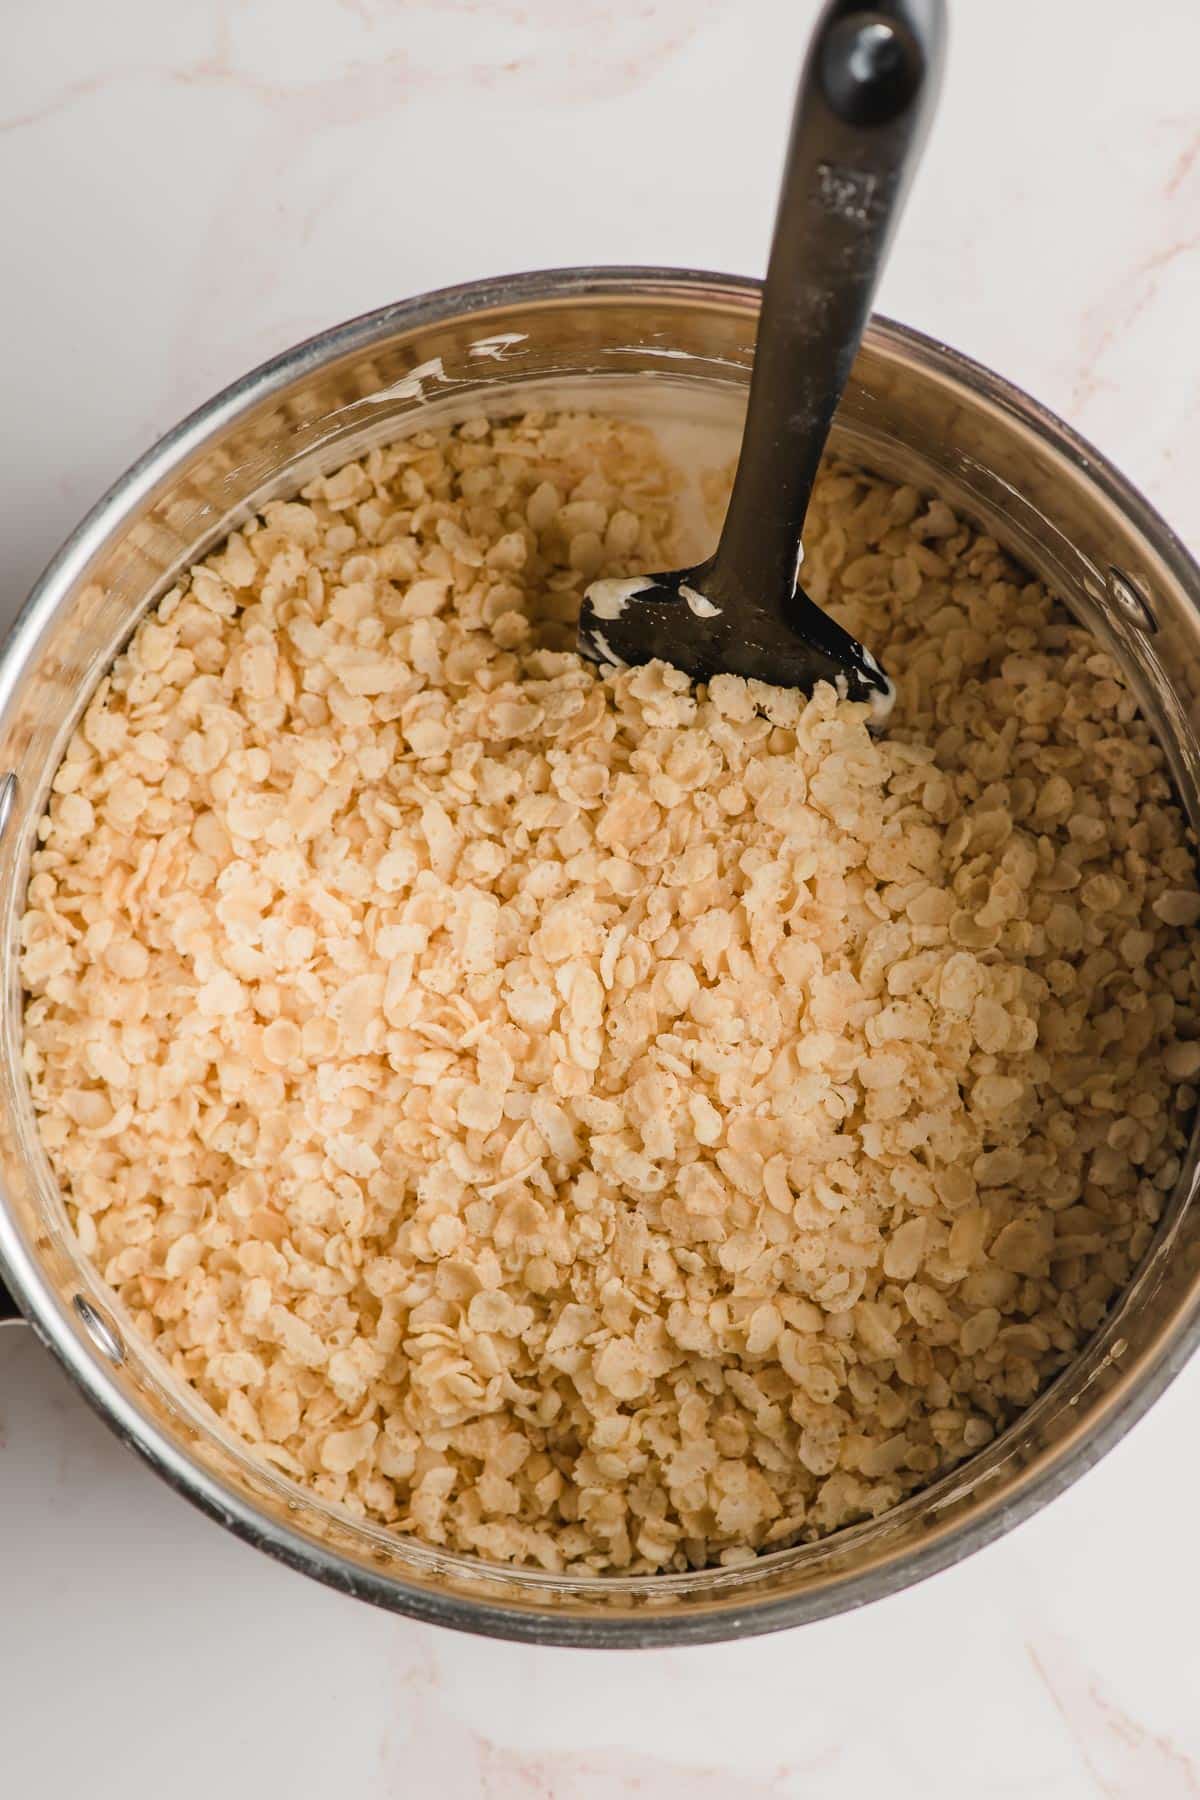 Rice krispies cereal being stirred into melted marshmallows.